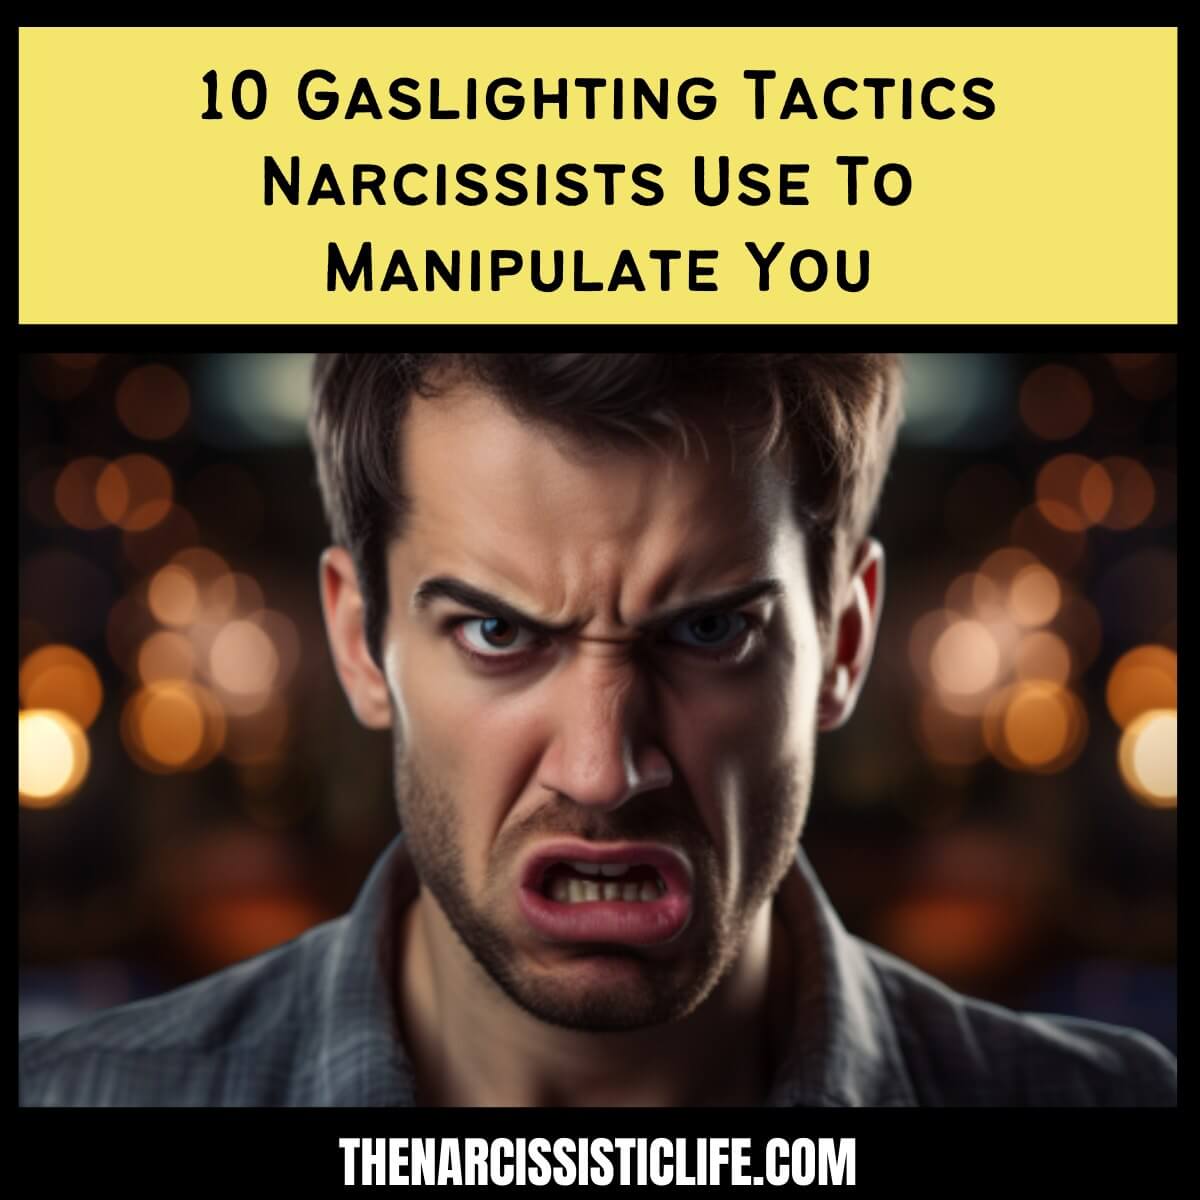 10 Gaslighting Tactics Narcissists Use To Manipulate You